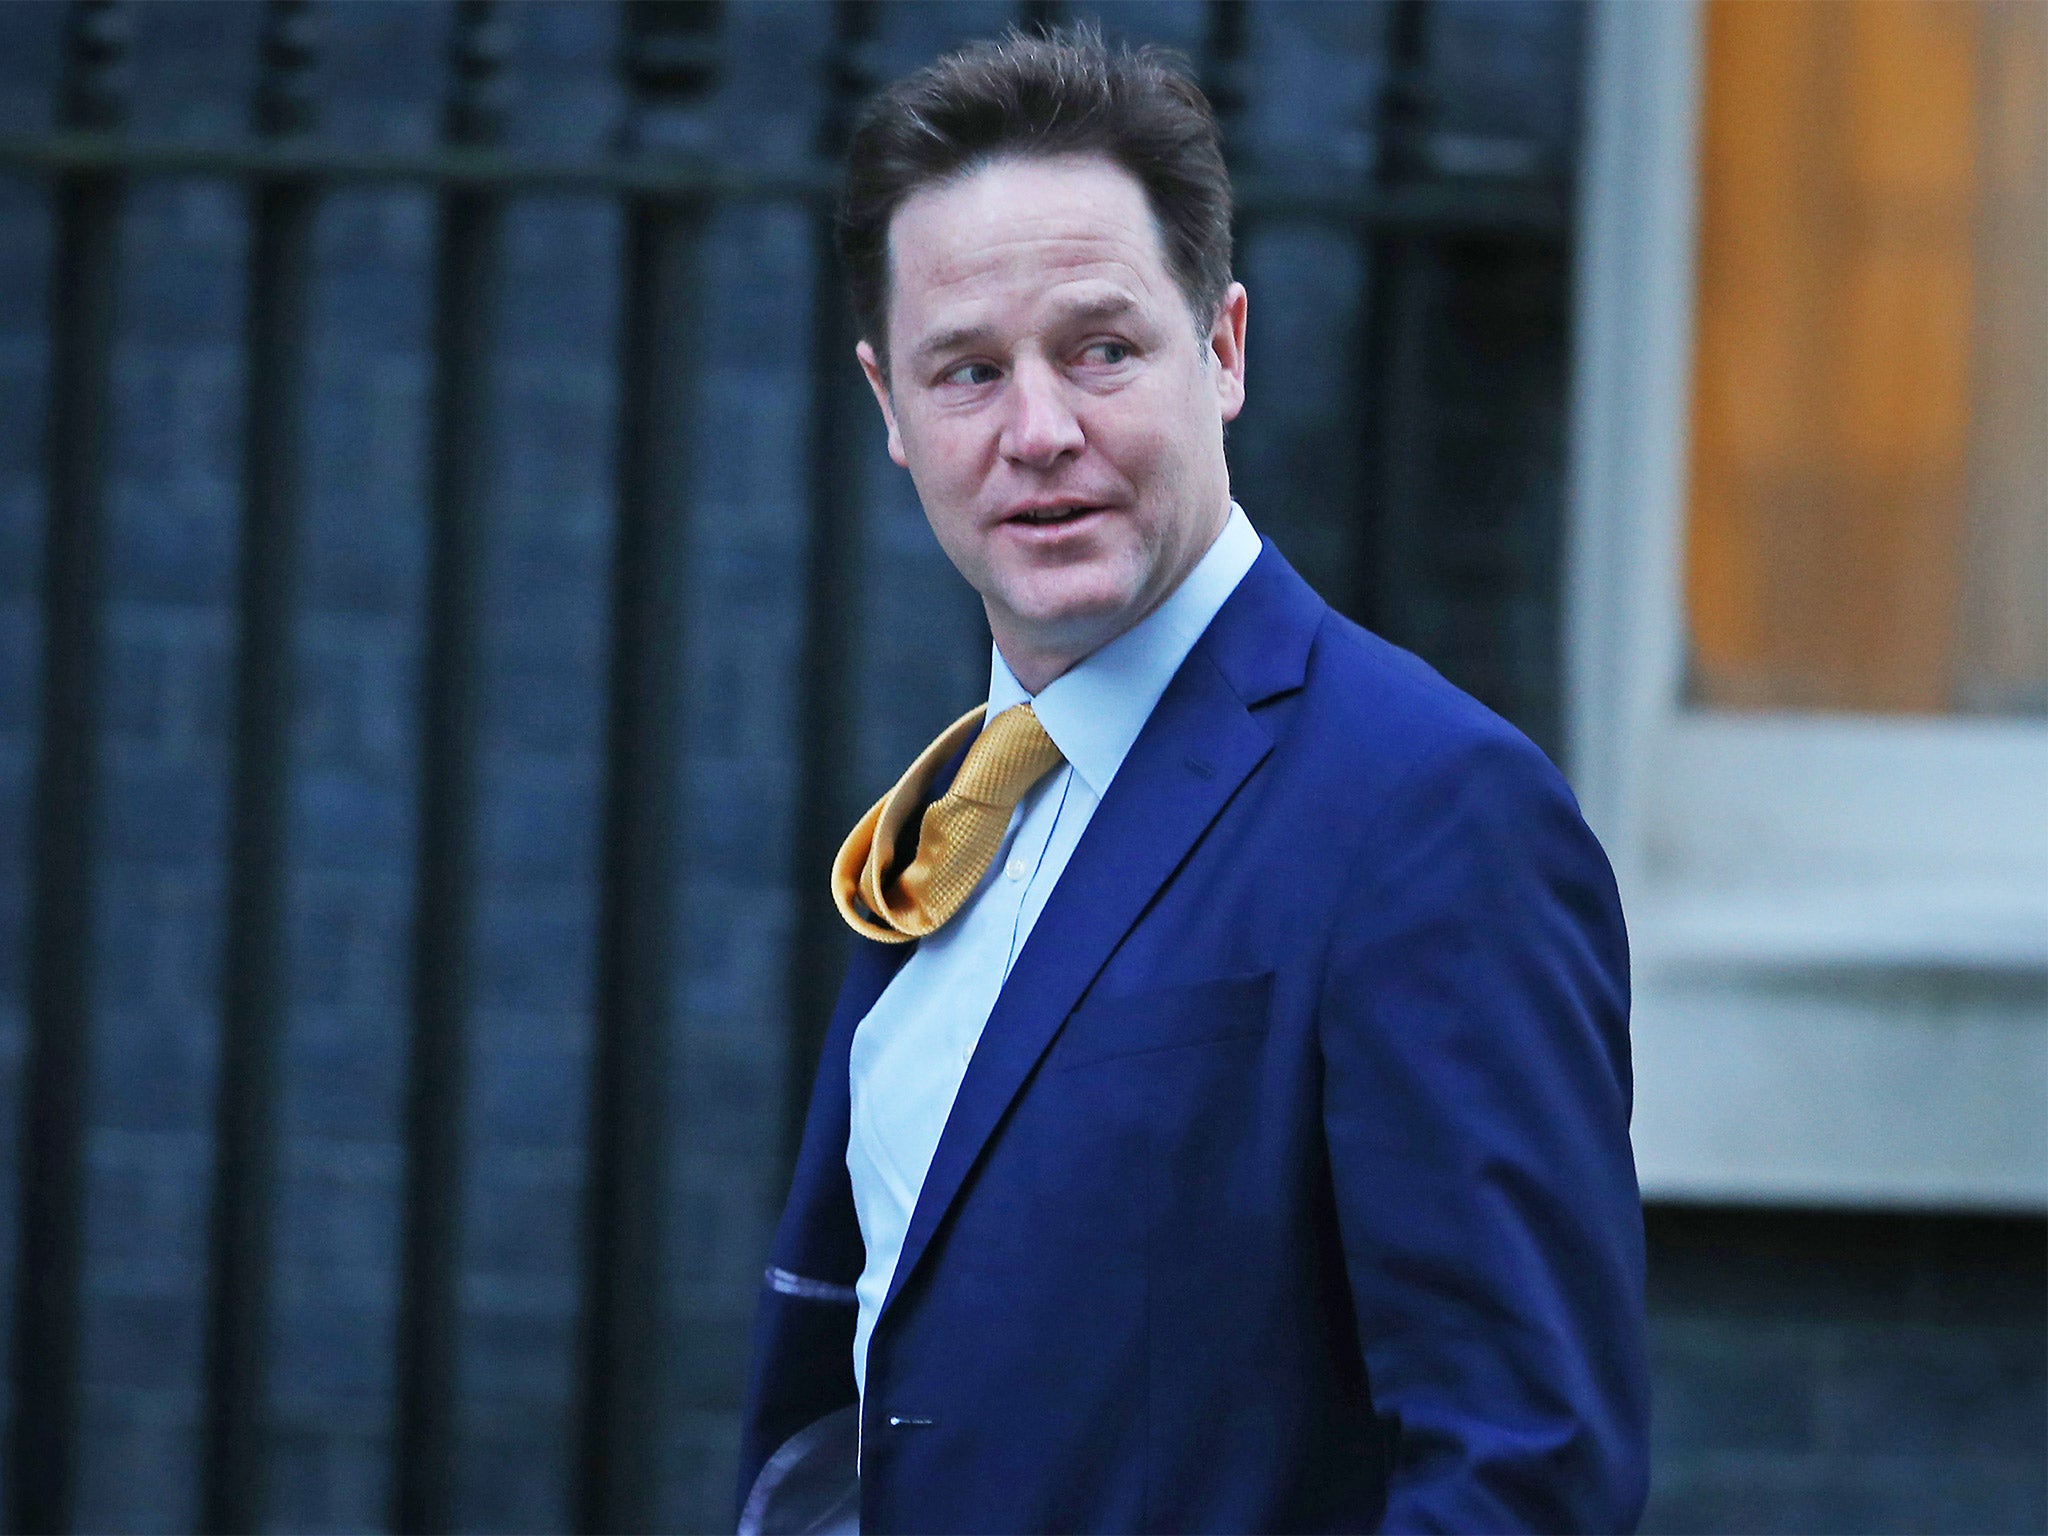 The Lib Dem leader is expected to return to the front bench for Prime Minister’s Questions next week